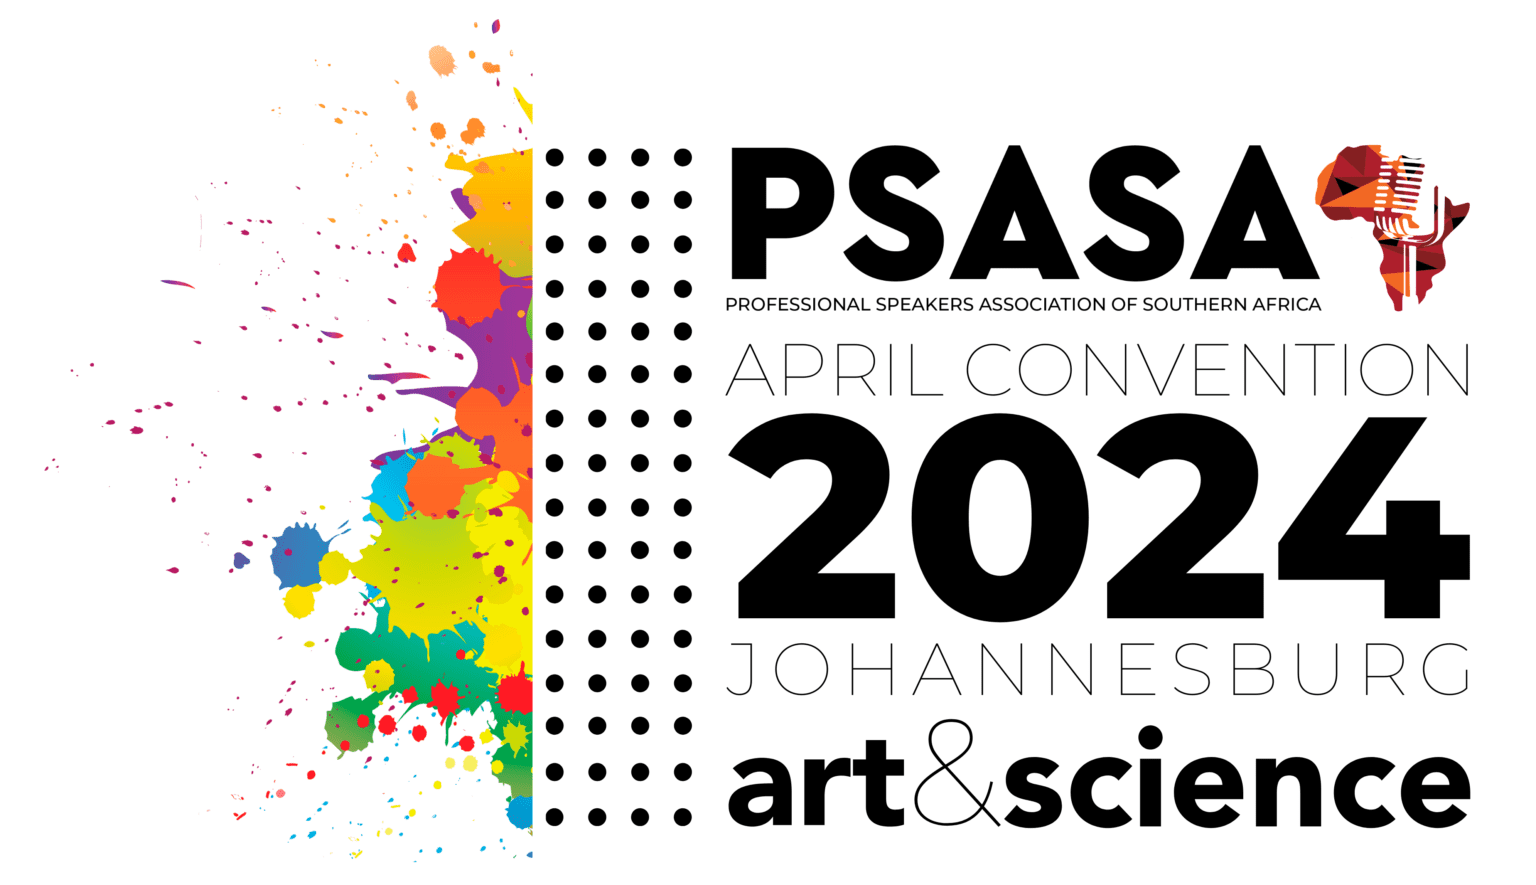 PSASA Annual Convention 2024 PSA Southern Africa